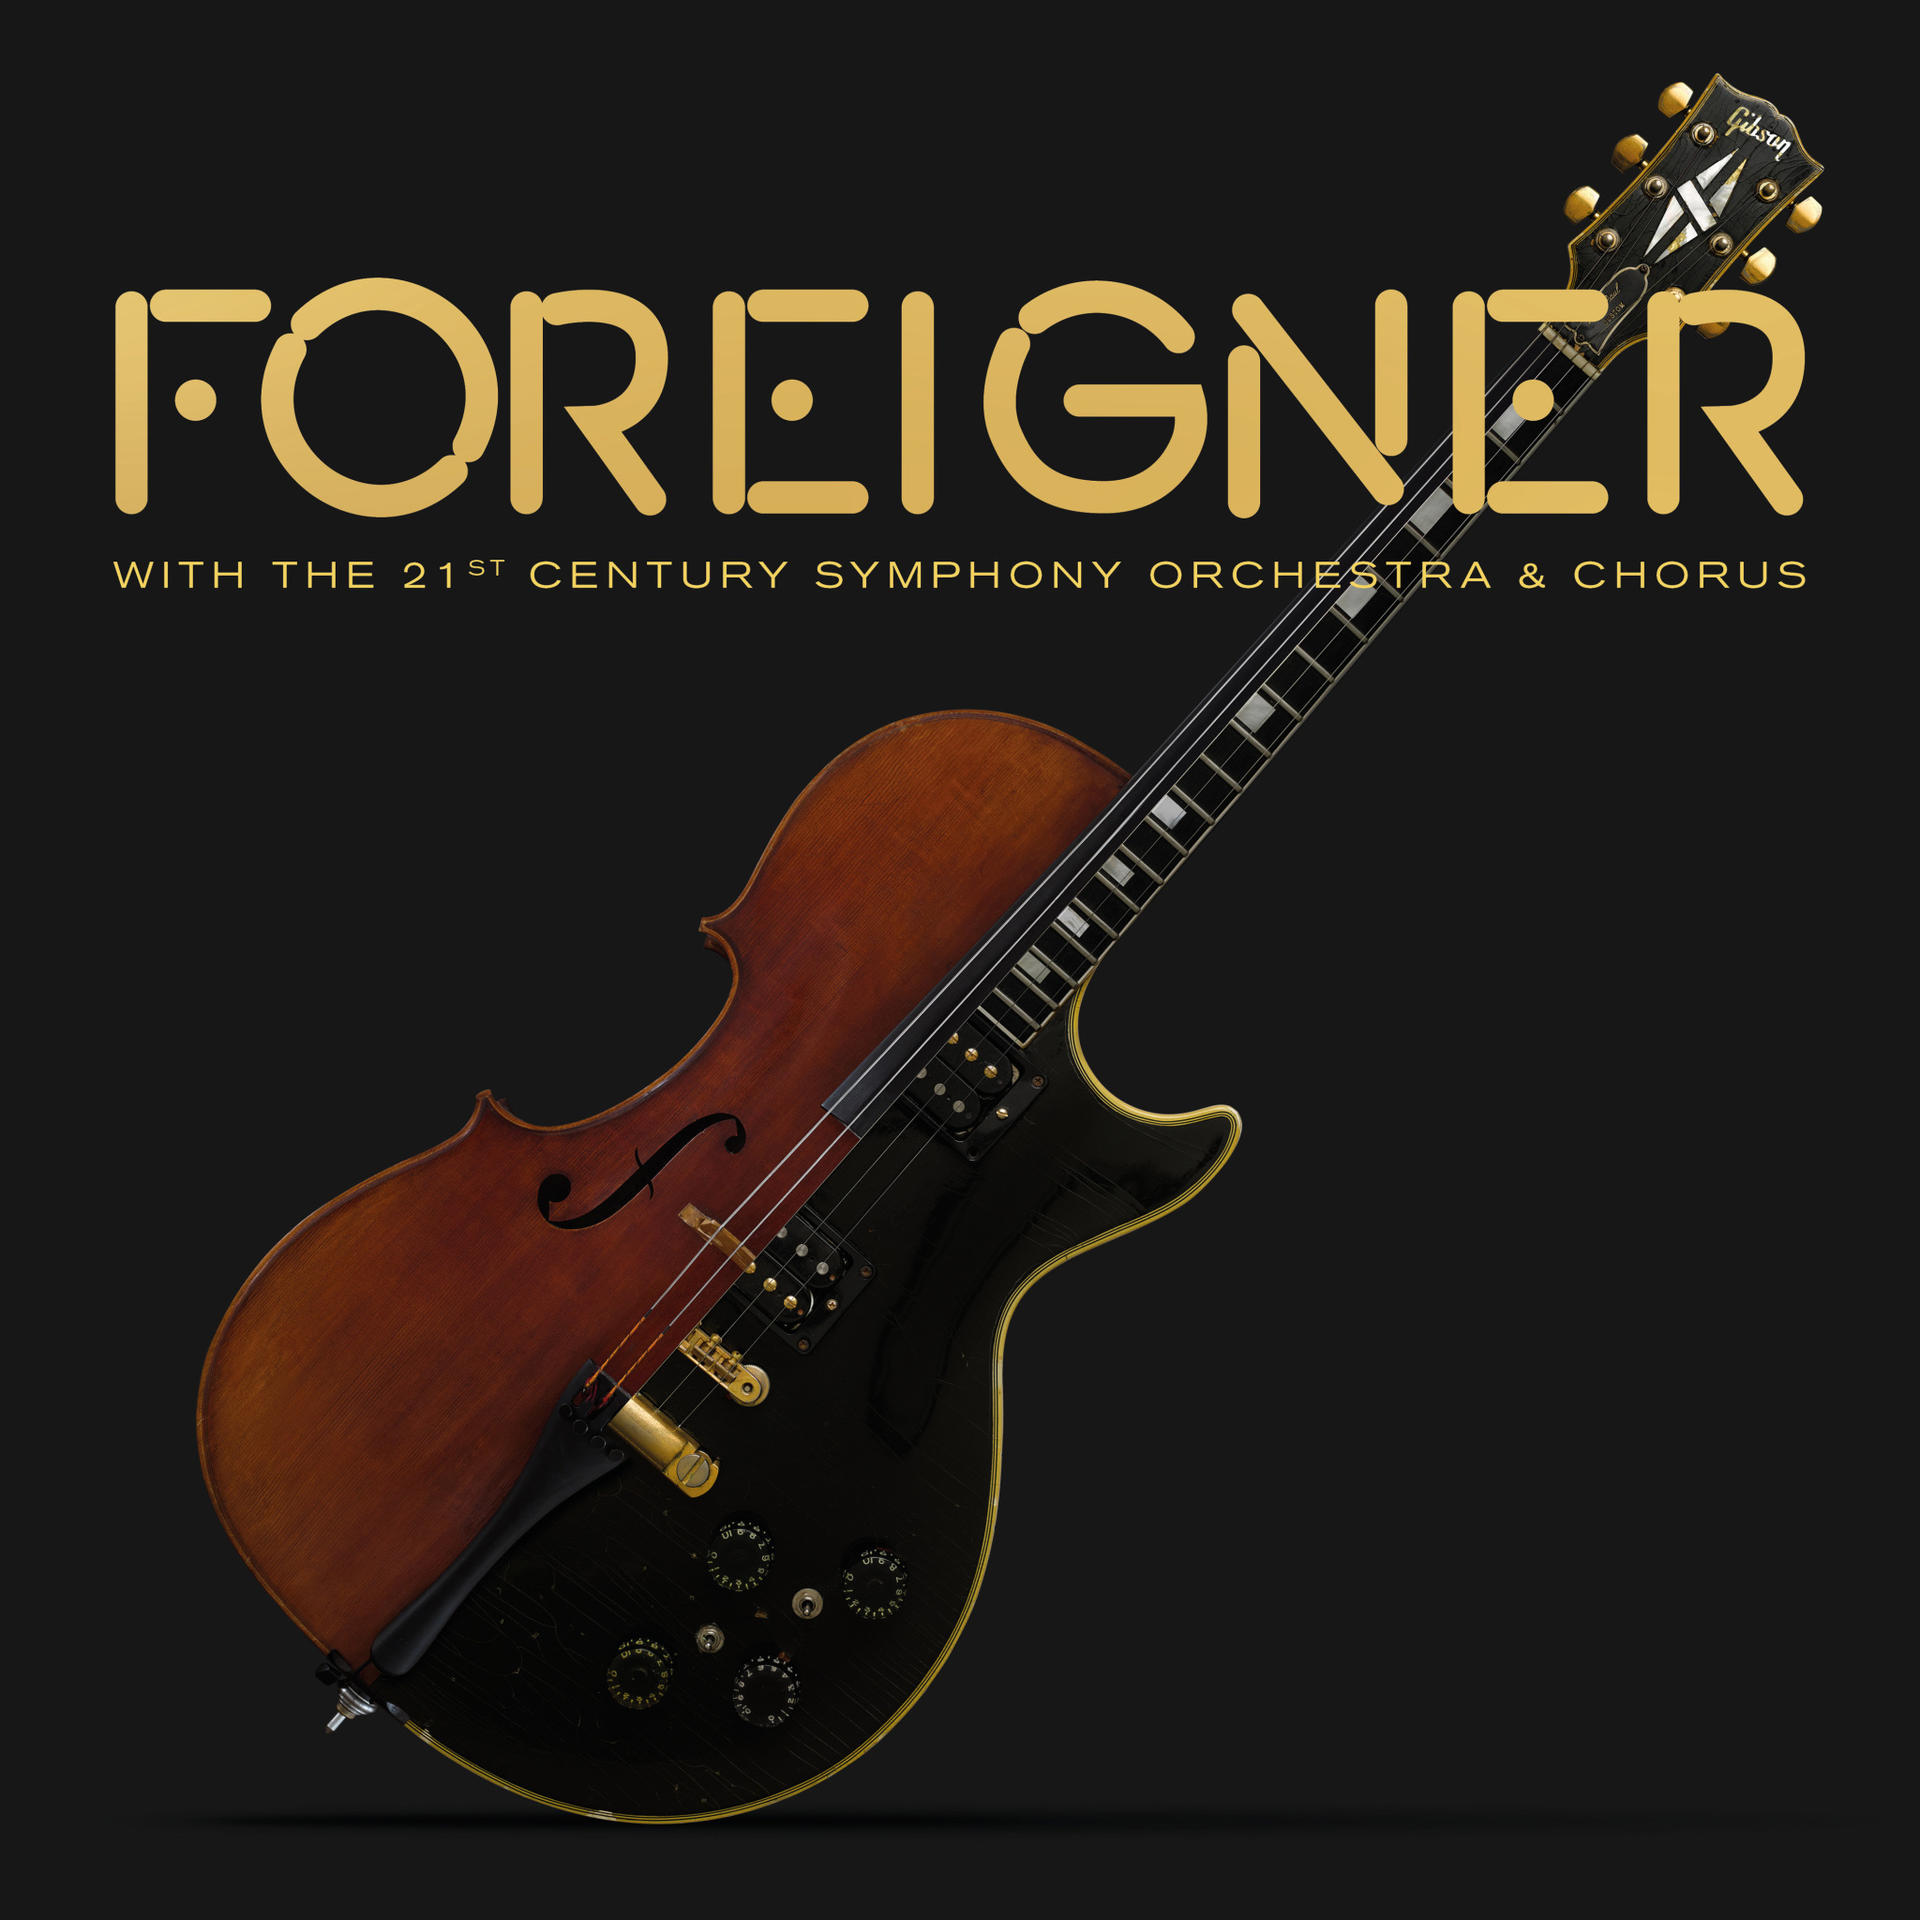 Foreigner - With The Orchestra Chorus 21st & (Vinyl) Century - Symphony